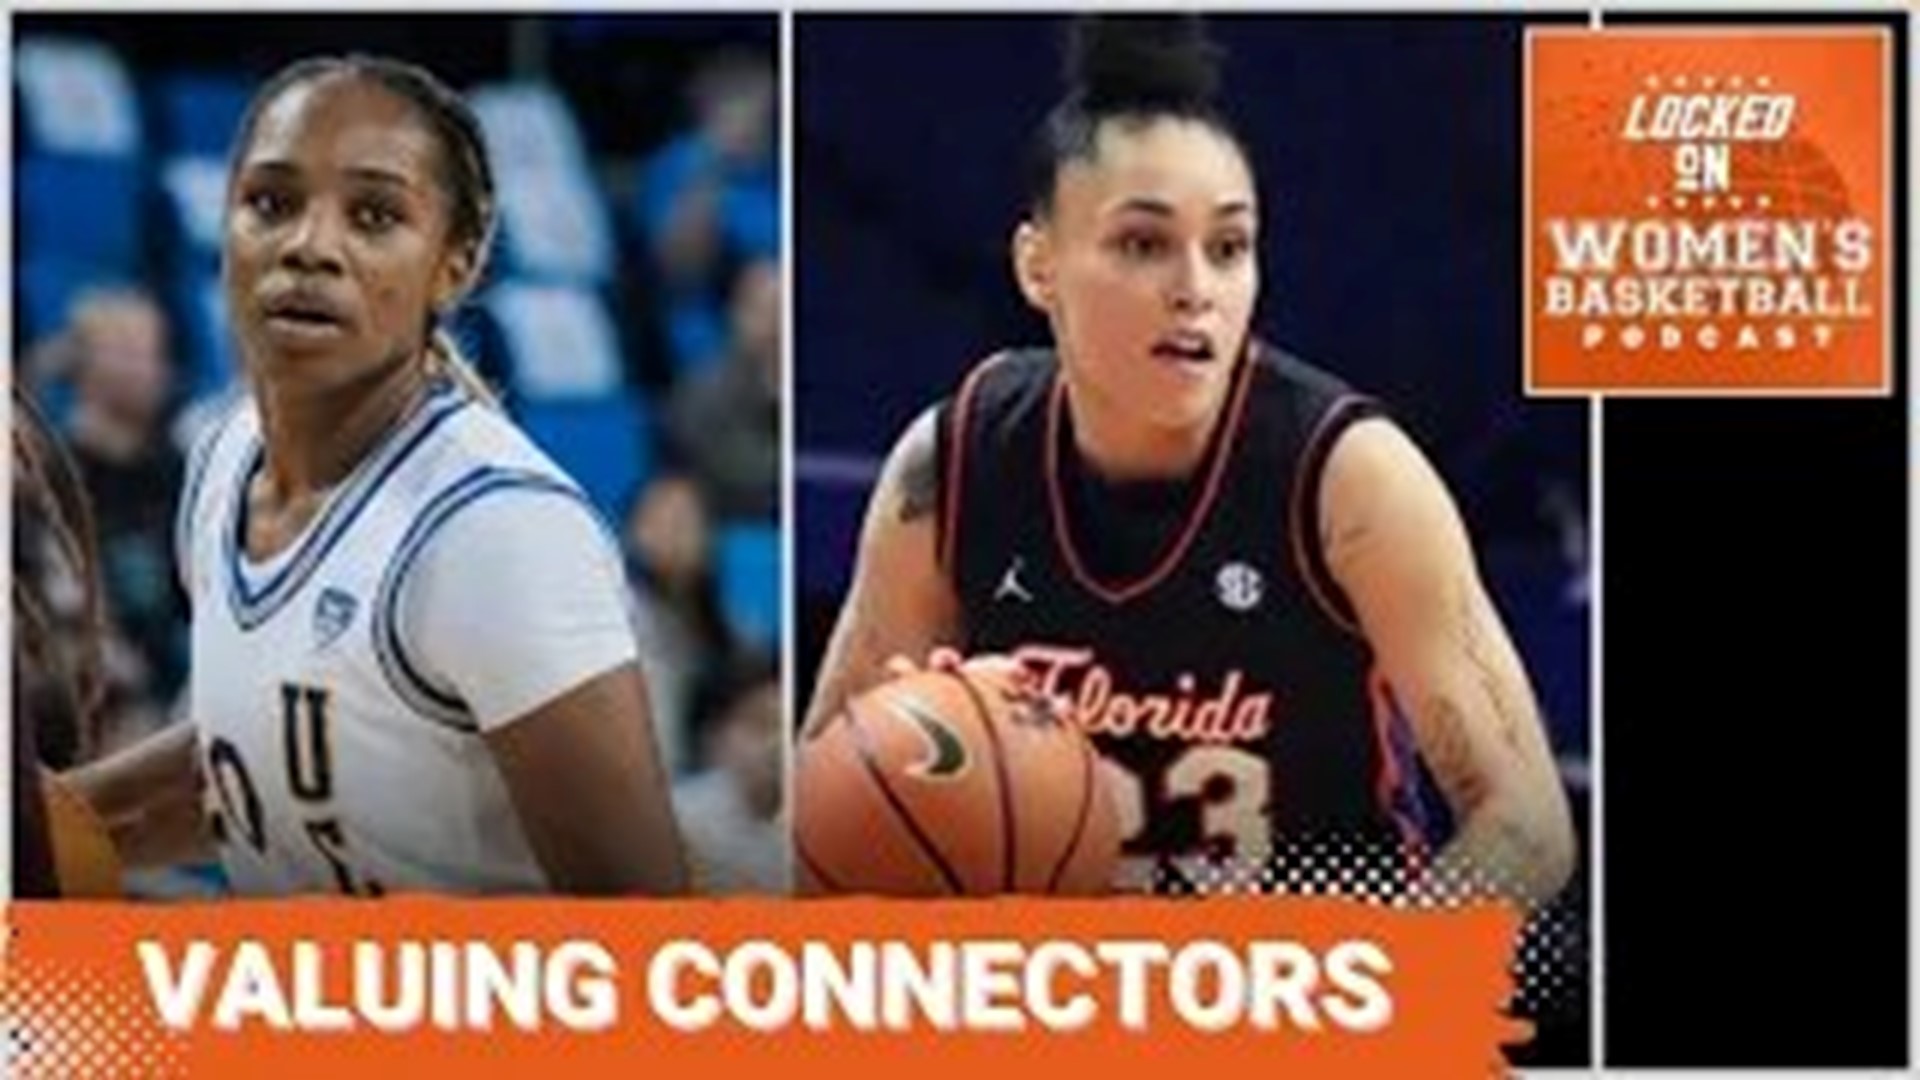 Host Hunter Cruse is joined by co-hosts Em Adler and Lincoln Shafer for scouting reports on UCLA’s Charisma Osborne and Florida’s Leilani Correa.